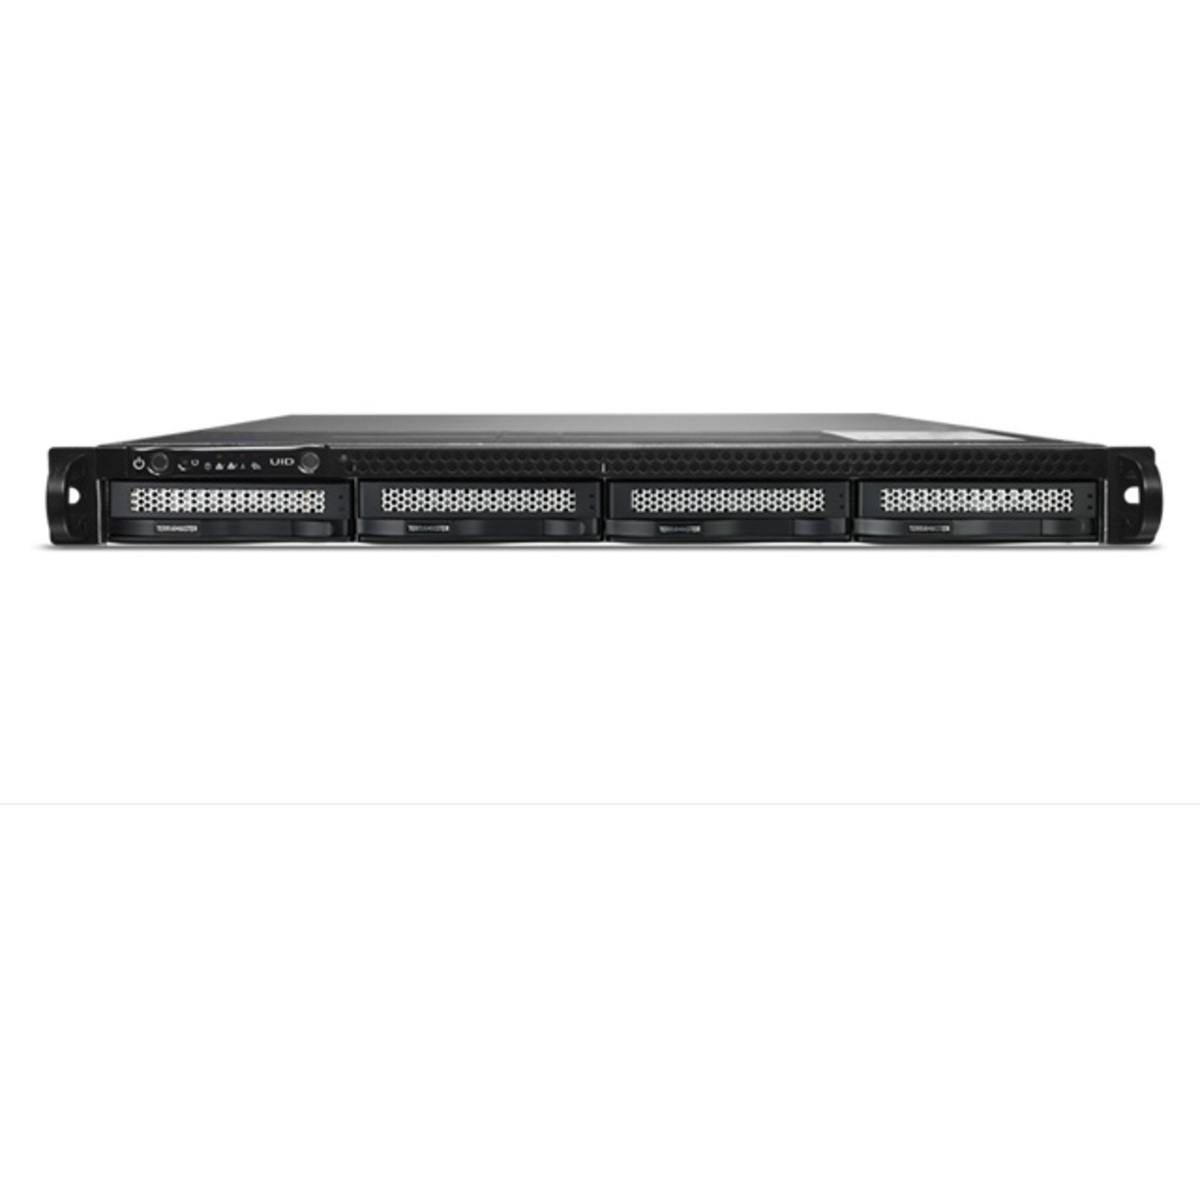 TerraMaster U4-111 12tb 4-Bay RackMount Multimedia / Power User / Business NAS - Network Attached Storage Device 2x6tb Seagate EXOS 7E10 ST6000NM019B 3.5 7200rpm SATA 6Gb/s HDD ENTERPRISE Class Drives Installed - Burn-In Tested U4-111